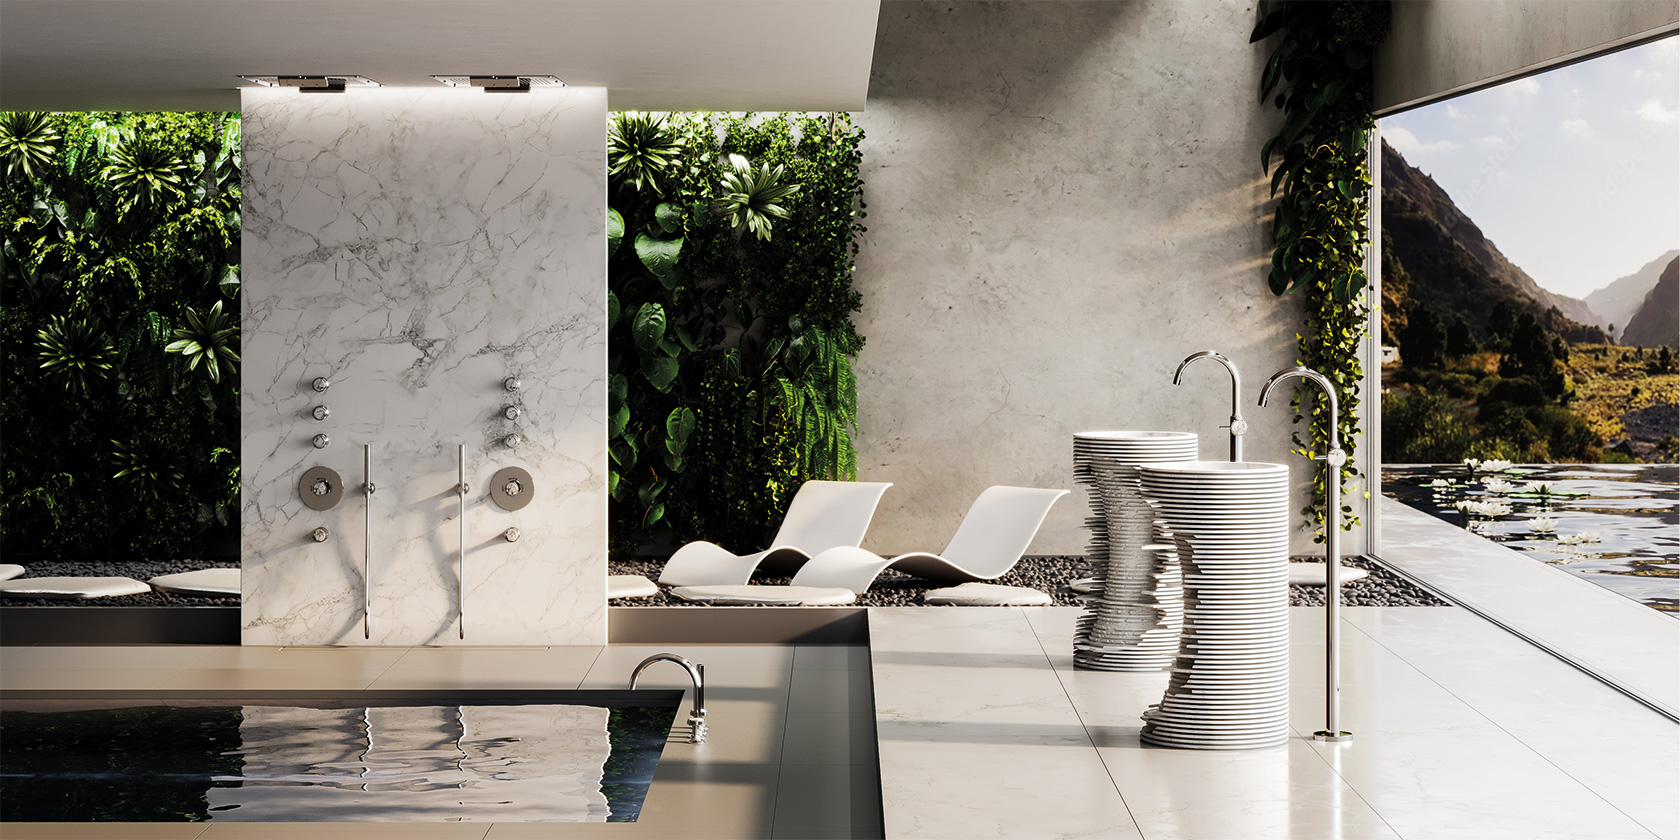 Inspiration Spa – Welcome to Jörger's Wellness Oasis with “Valencia” in Platinum with White Turquoise